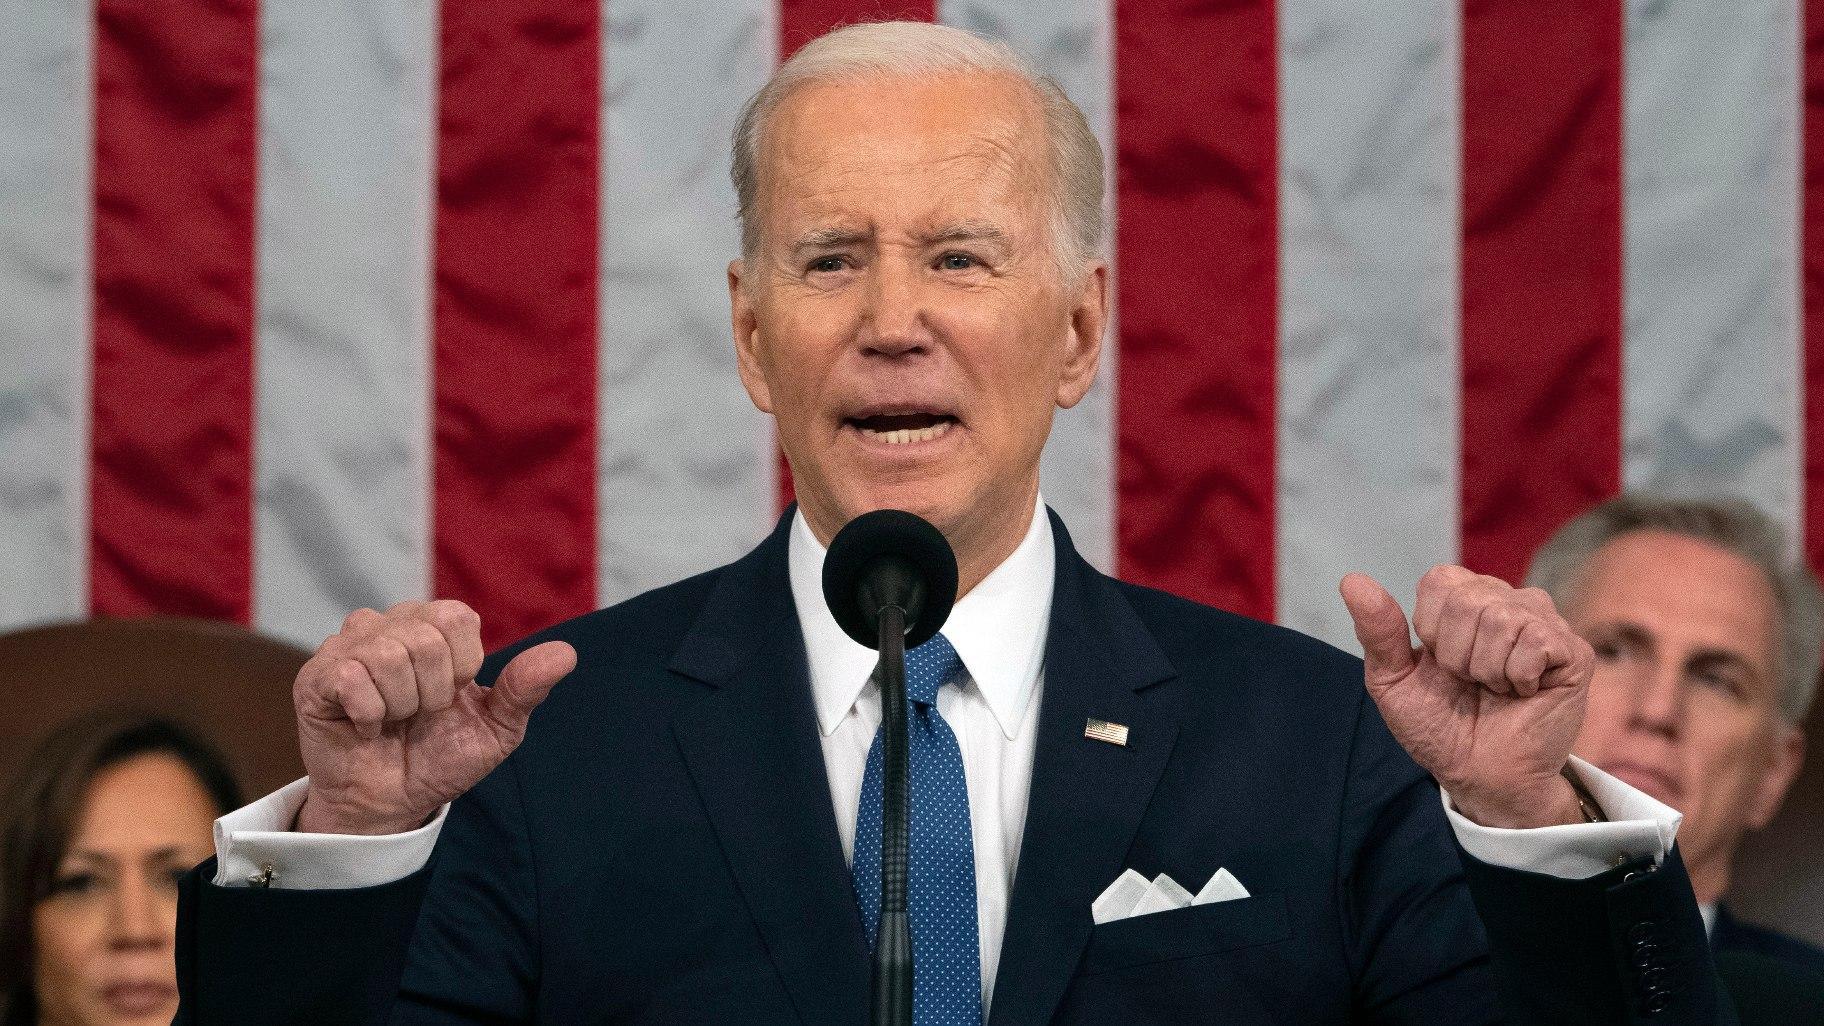 President Joe Biden delivers the State of the Union address to a joint session of Congress at the U.S. Capitol, Feb. 7, 2023, in Washington, as Vice President Kamala Harris and House Speaker Kevin McCarthy of Calif., listen. (Jacquelyn Martin, Pool, File)